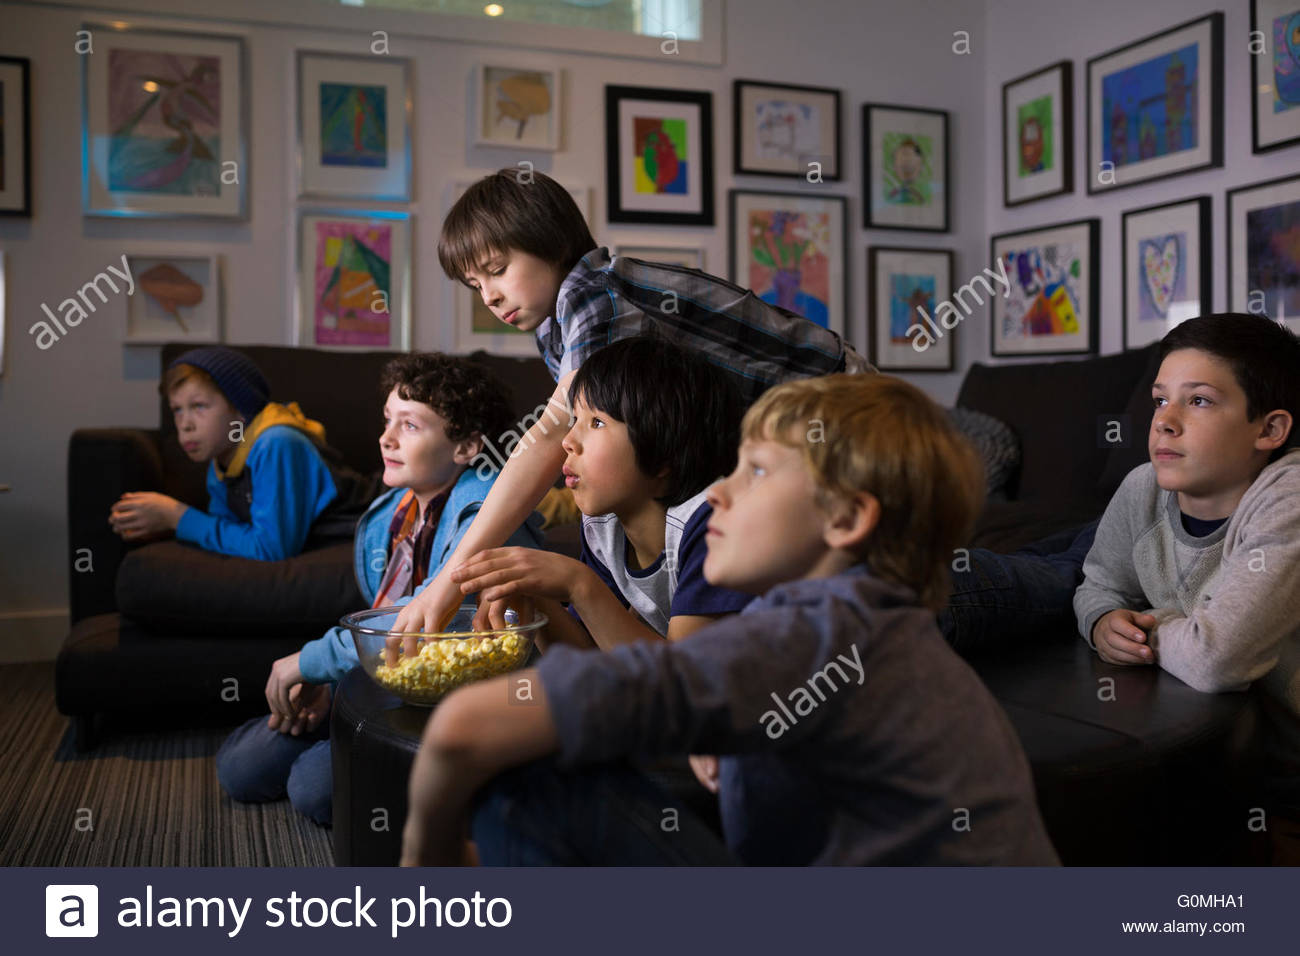 Boys eating popcorn watching TV in living room Stock Photo